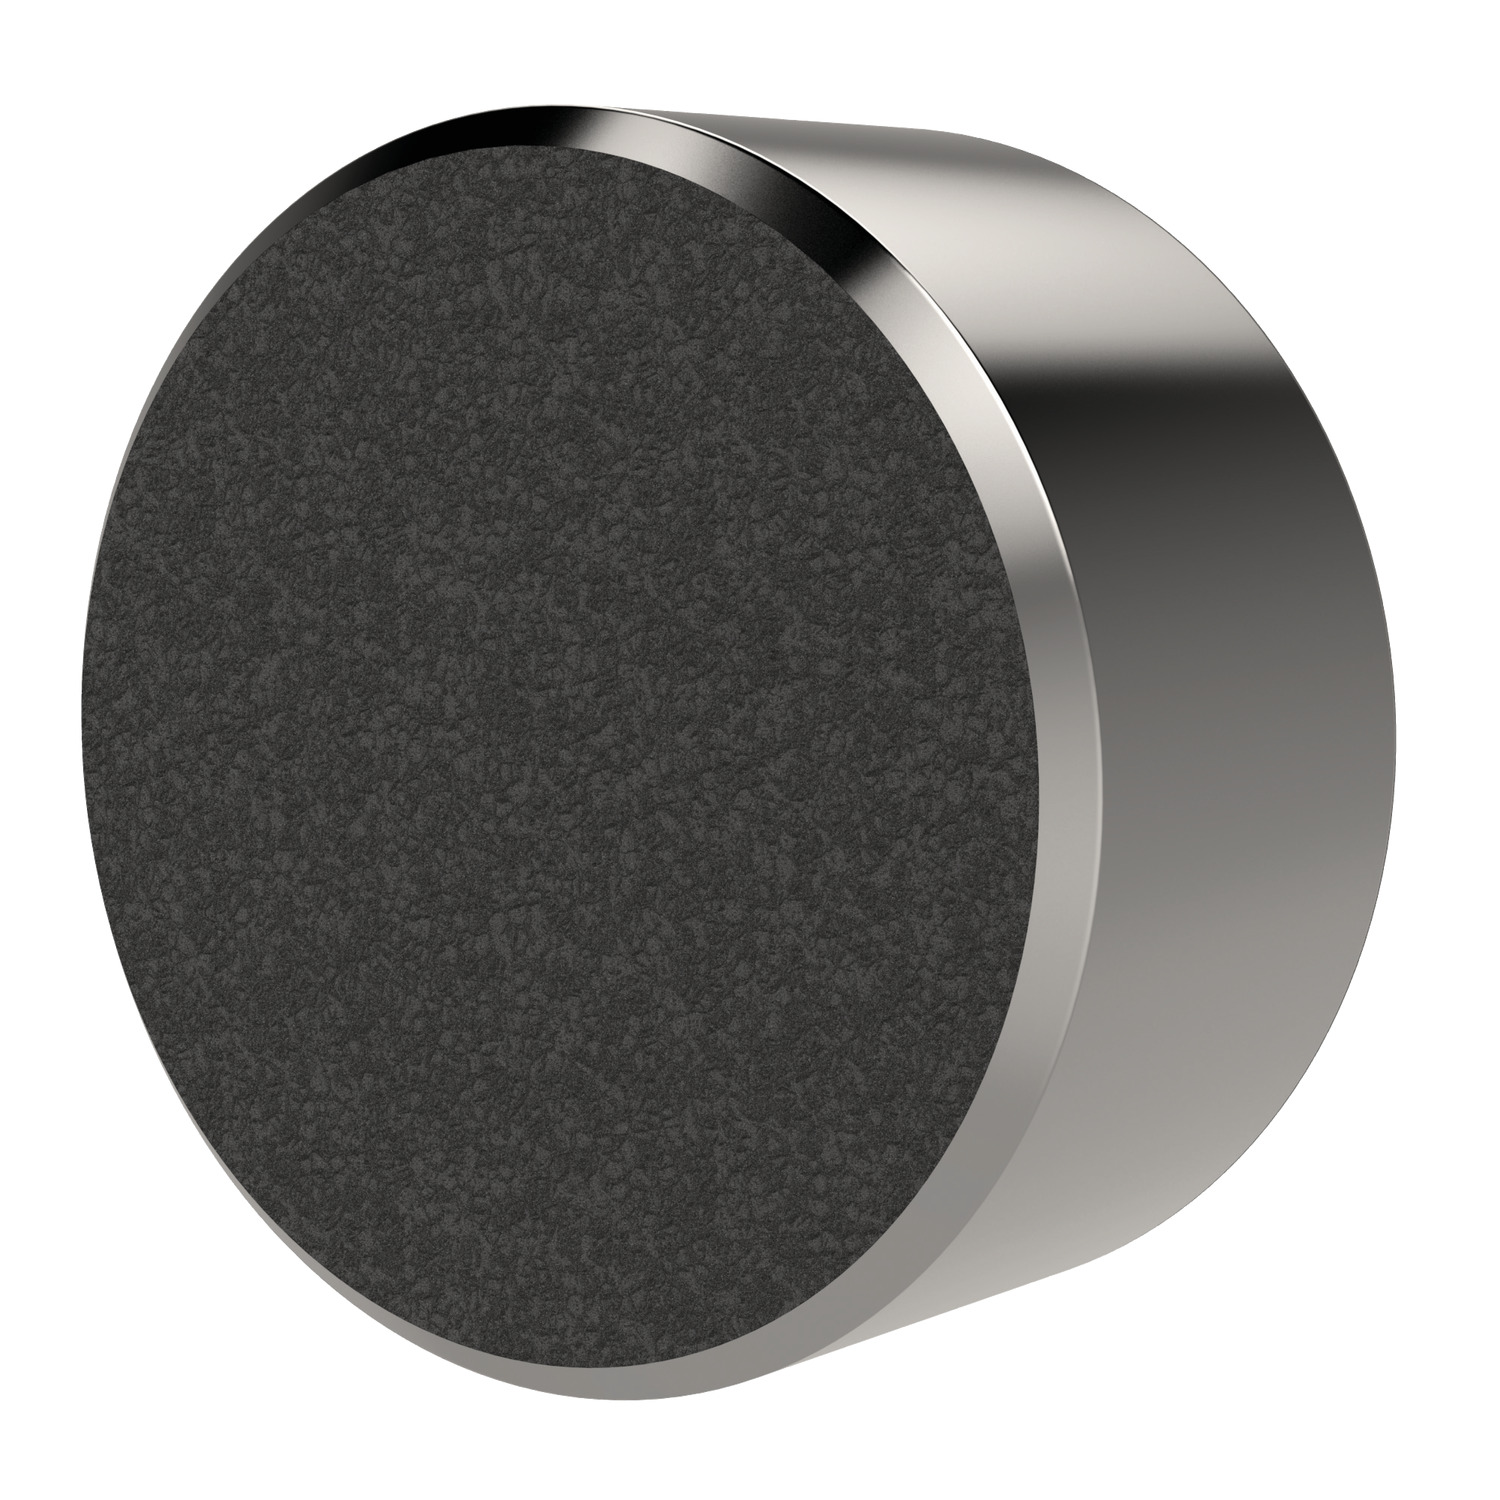 Gripping Pads - Diamond Coated Abrasive surface permanently fused to a 17-4 stainless steel pad, hardened to Rc 43/46. The surface texture is comparable to a 100 grit abrasive. Mount via tapped or counter bored hole.